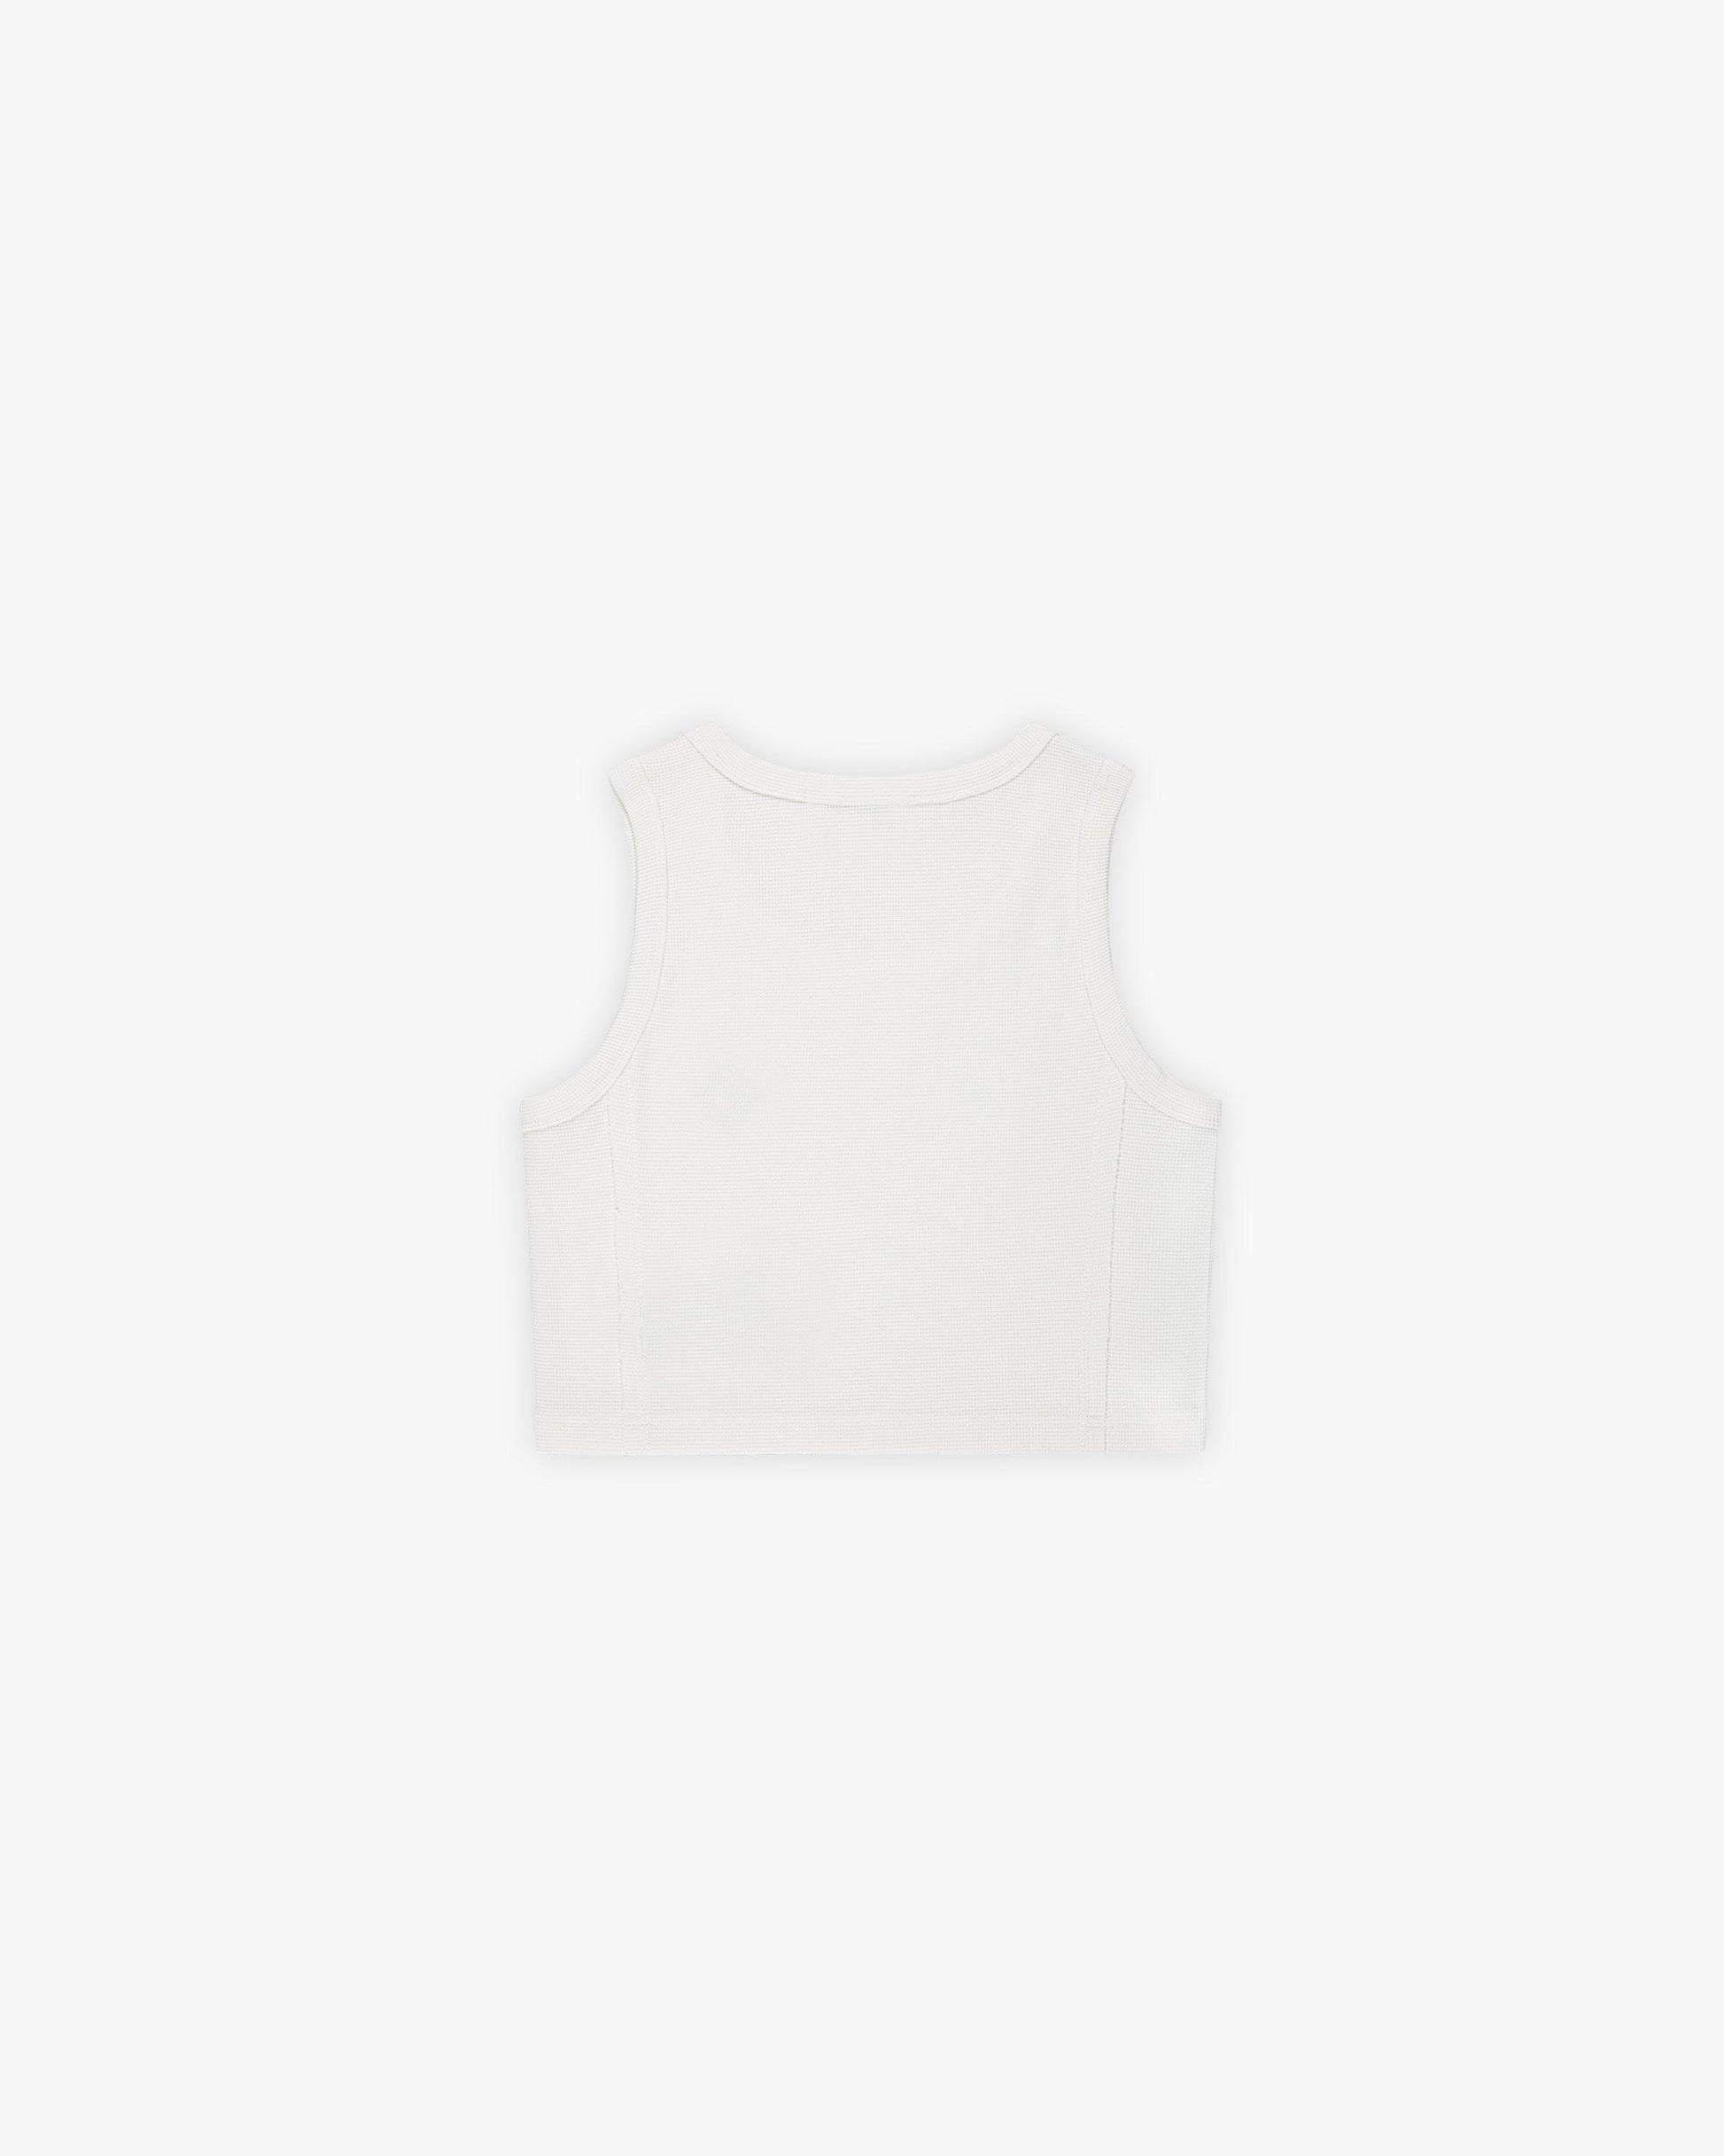 CROP TANKTOP DOUBLE PACK (BLACK & WHITE) - VICINITY